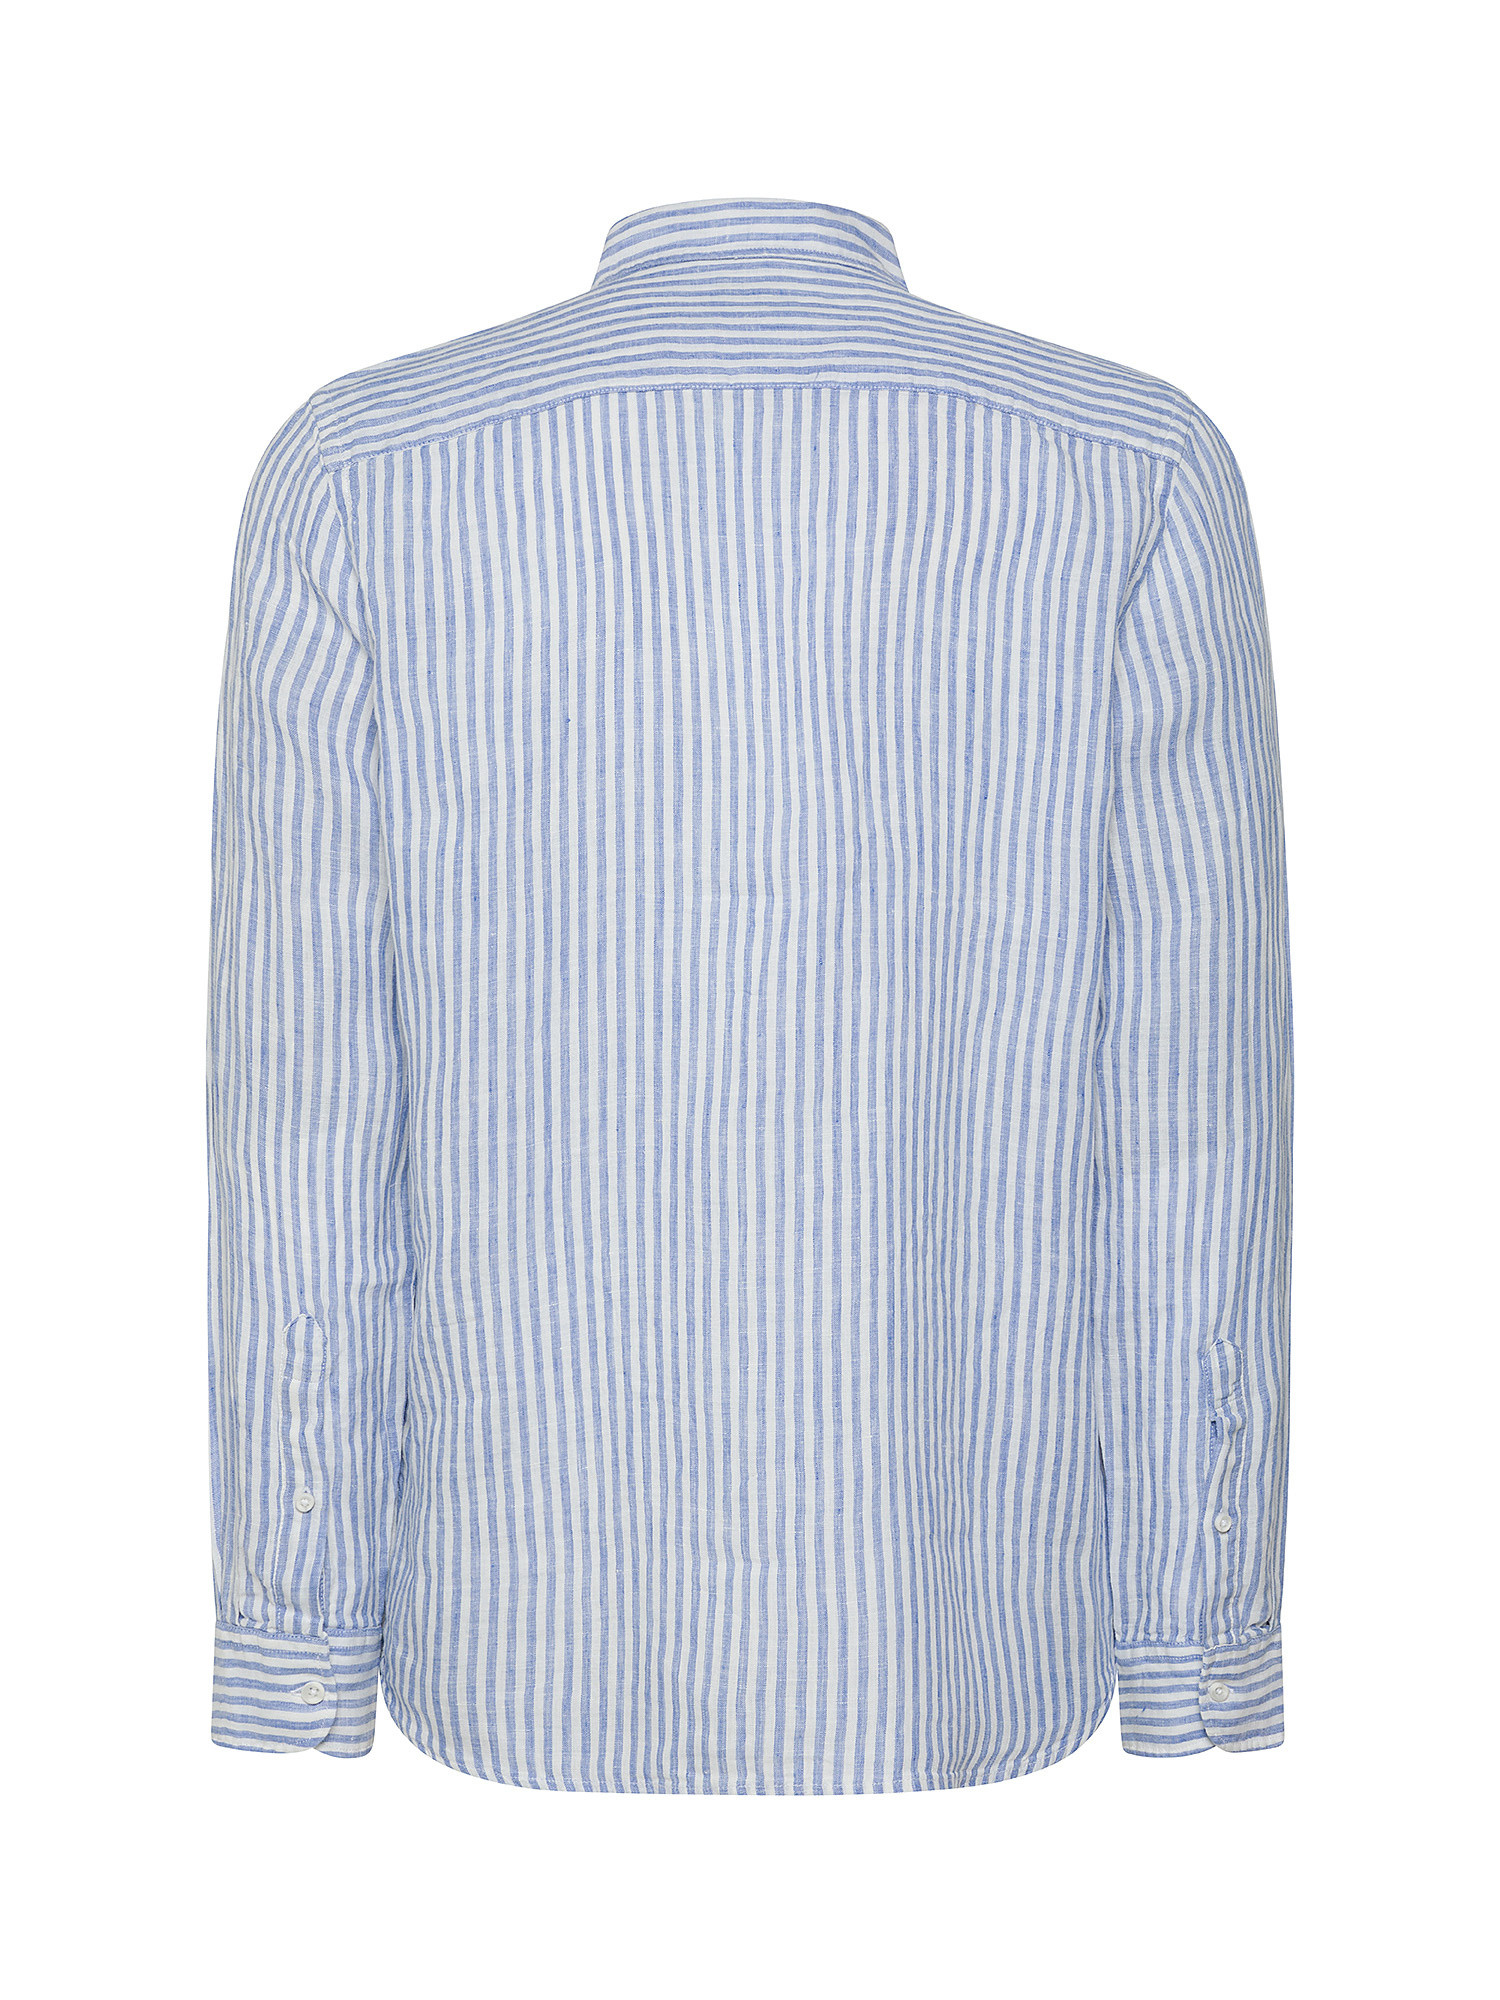 JCT - Striped shirt in pure linen, Light Blue, large image number 1